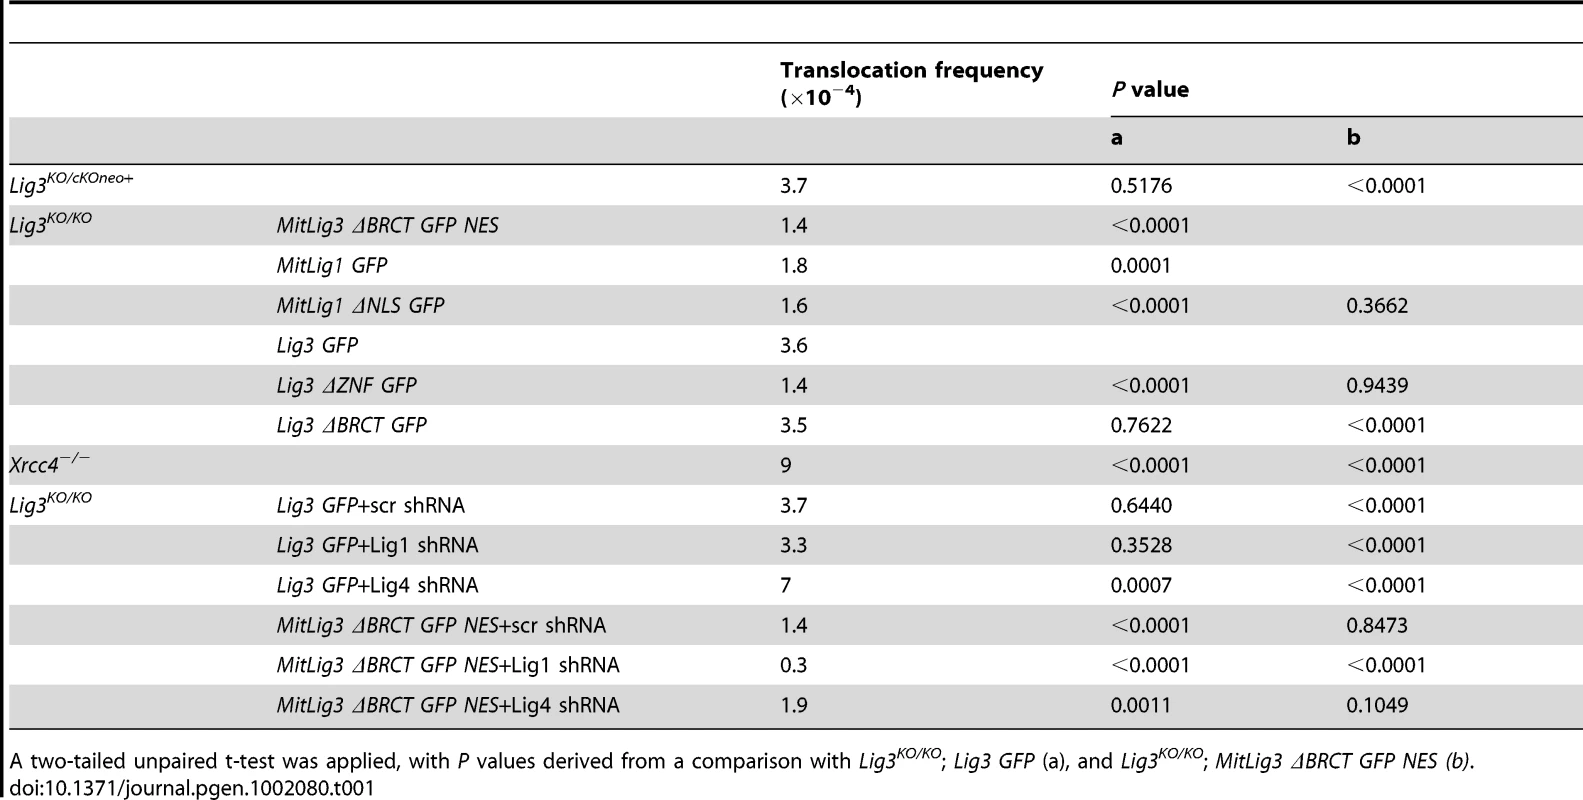 Translocation frequencies for various cell lines tested.